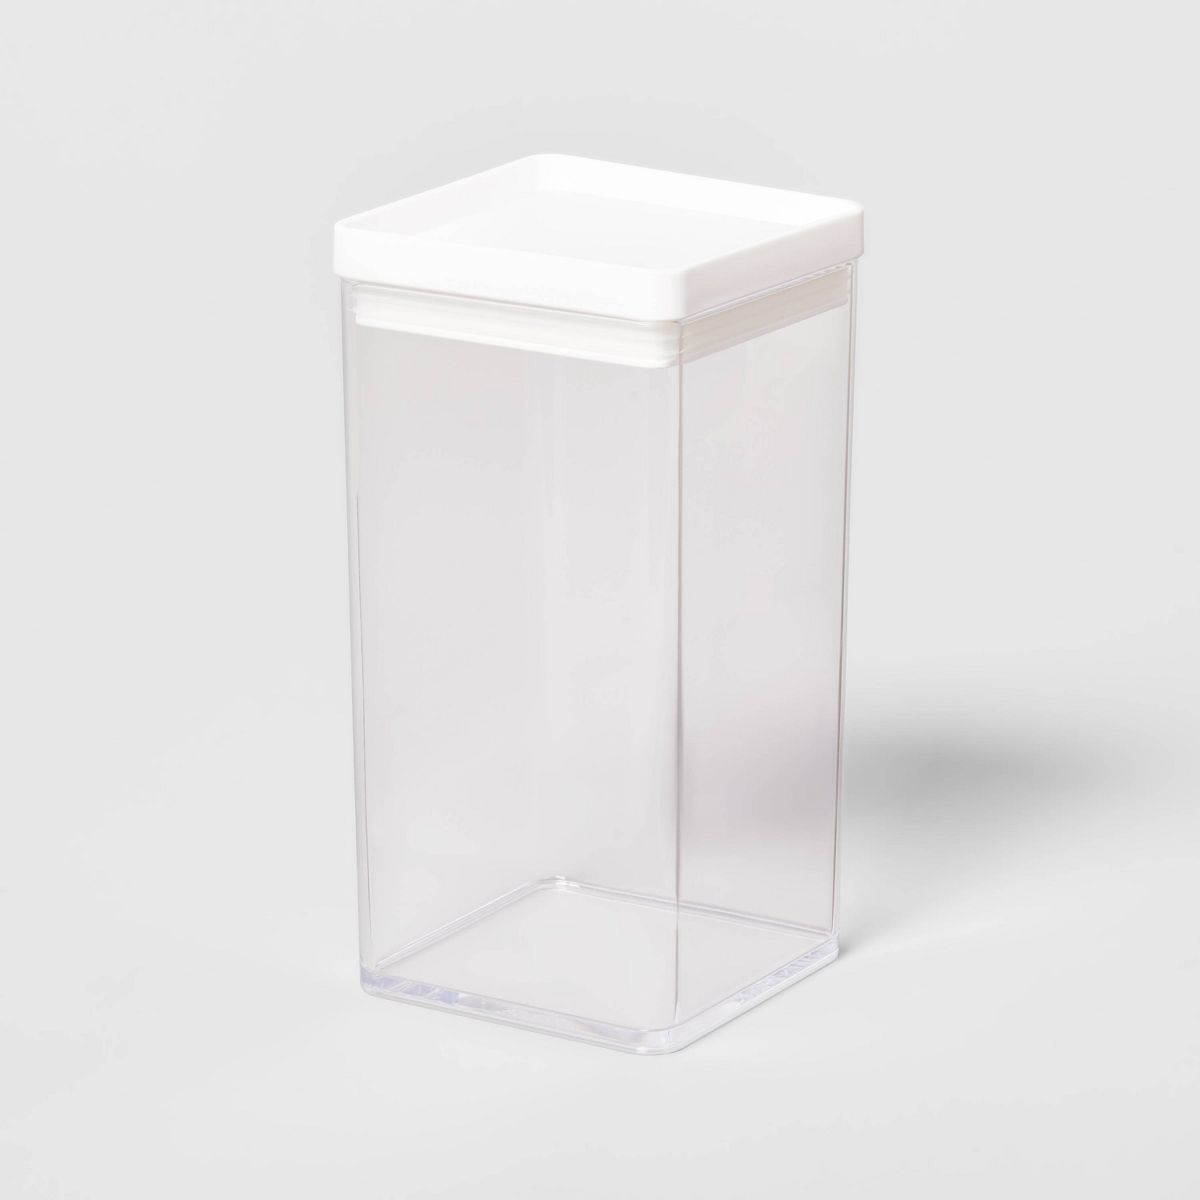 4"W X 4"D X 8"H Plastic Food Storage Container Clear - Brightroom™ | Target